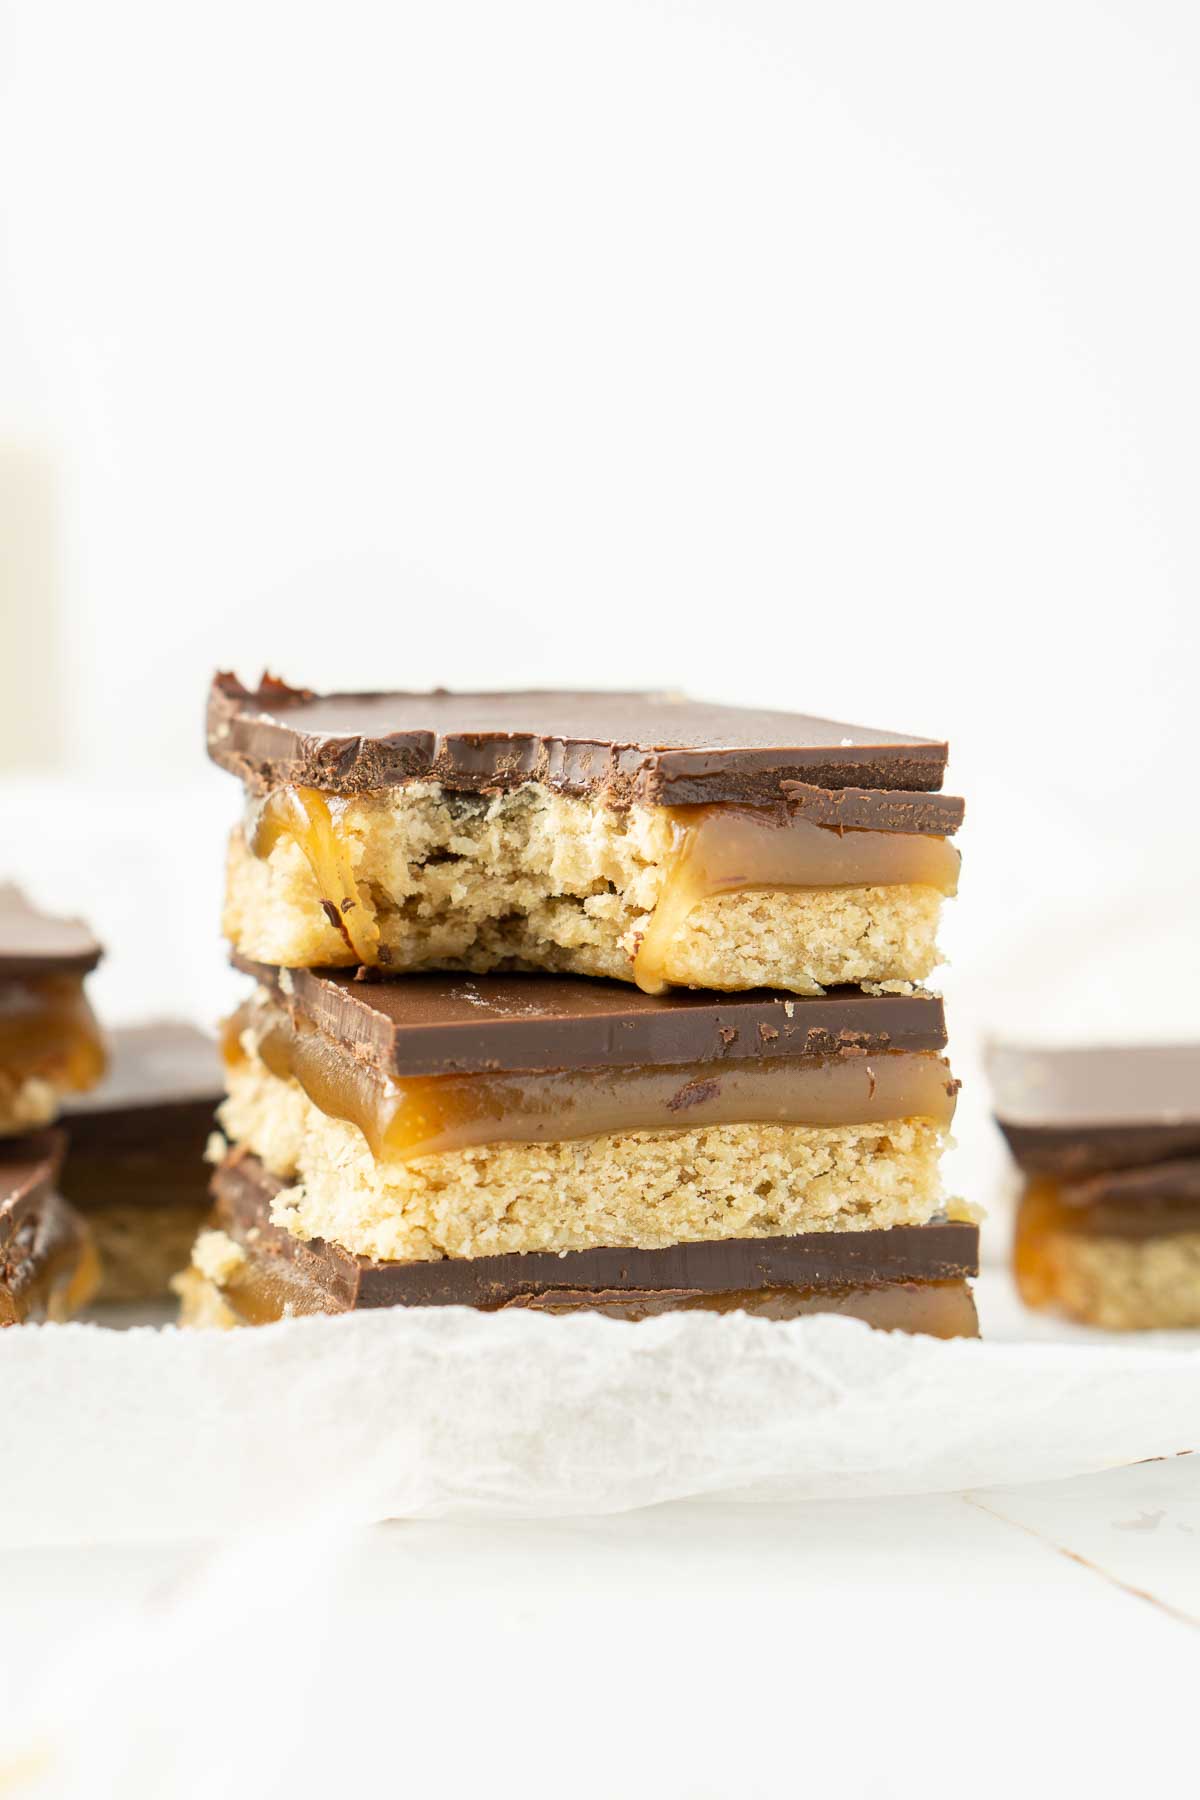 Close up of caramel slice on white baking paper with a bite taken.